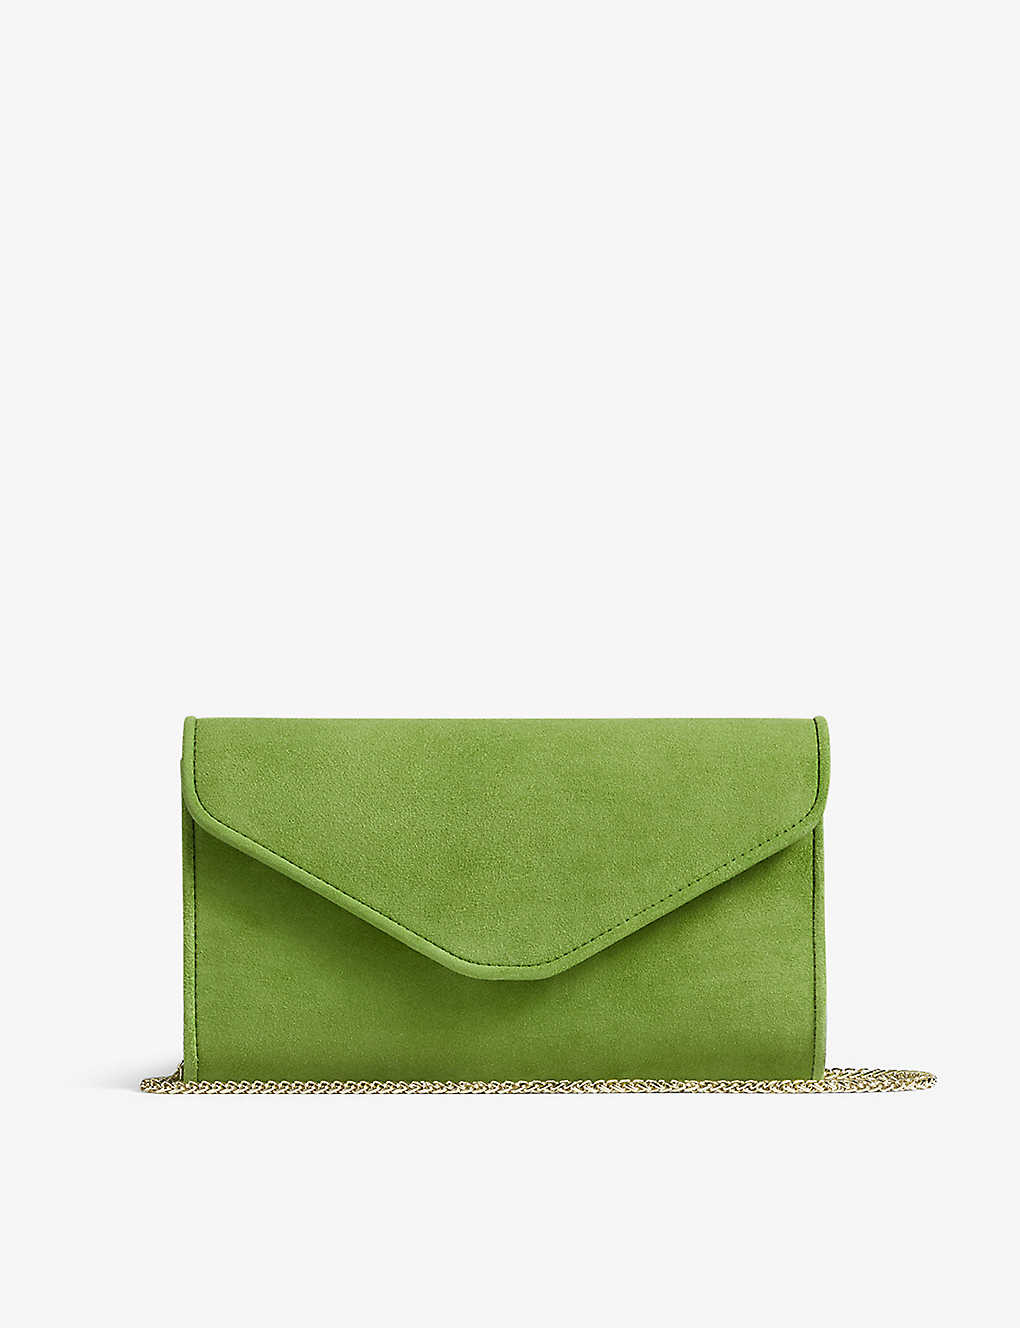 Lk Bennett Womens Gre-green Dominica Piped-trim Suede Envelope-clutch Bag